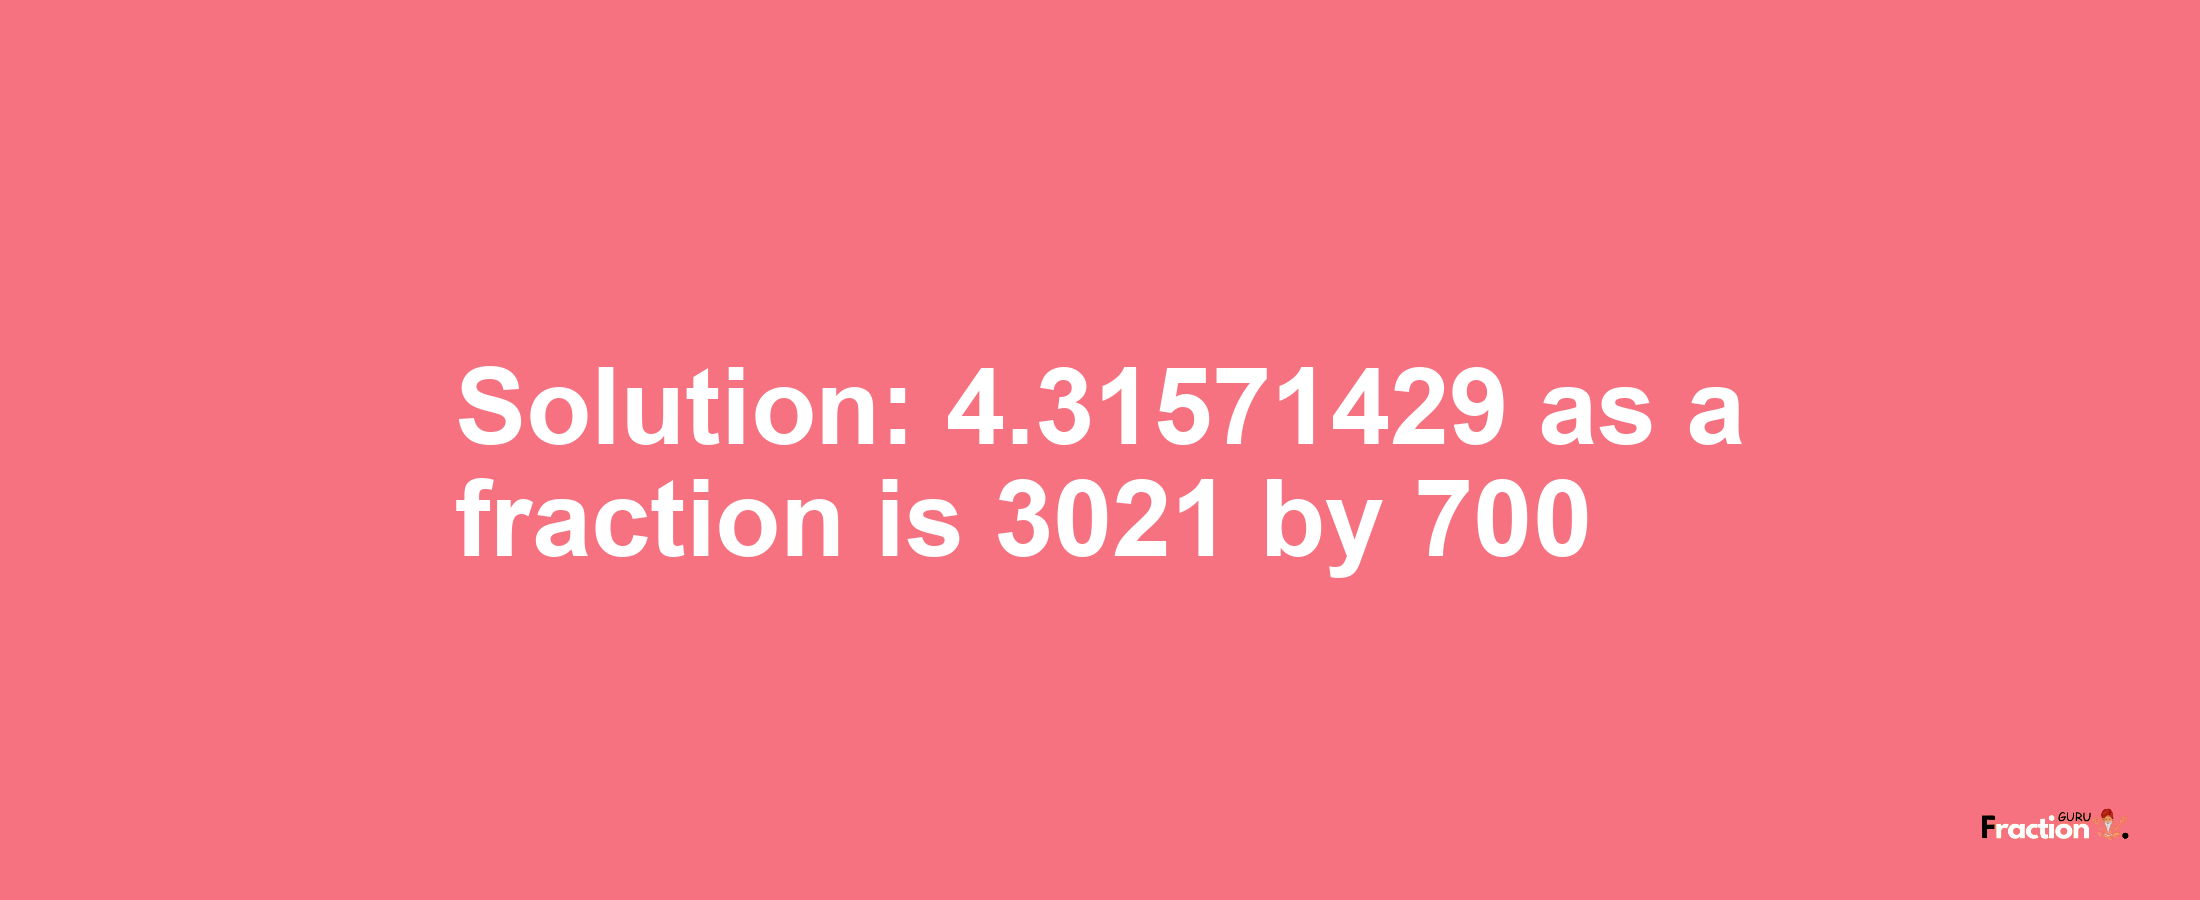 Solution:4.31571429 as a fraction is 3021/700